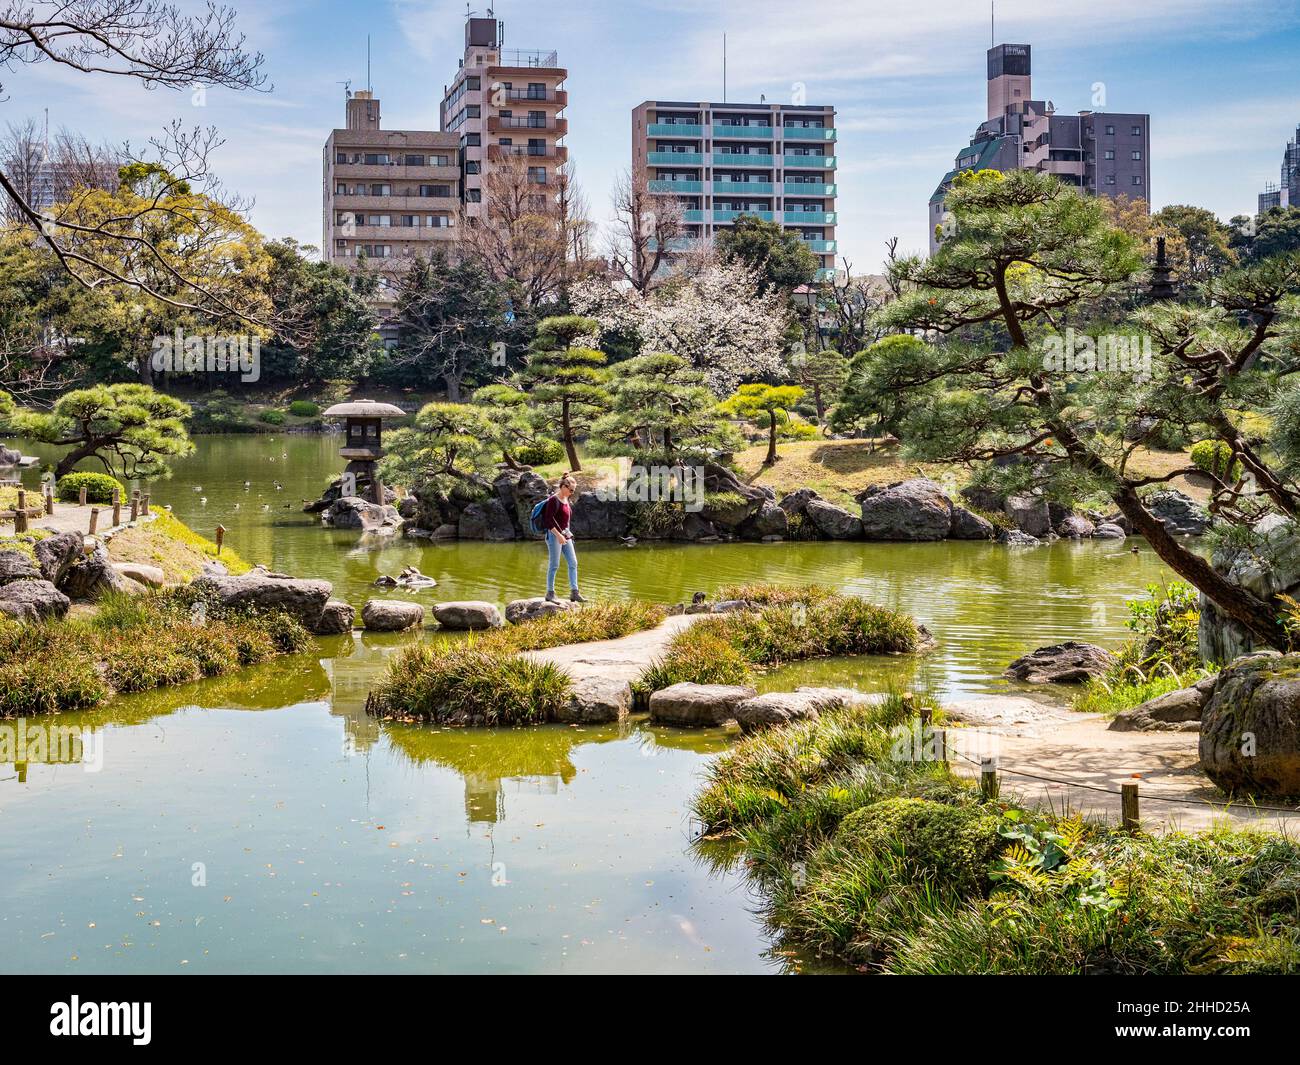 5 April 2019: Tokyo, Japan - Young woman crossing the lake in Kyu-Shiba-rikyu Gardens, a traditional style landscape garden in central Tokyo. Stock Photo